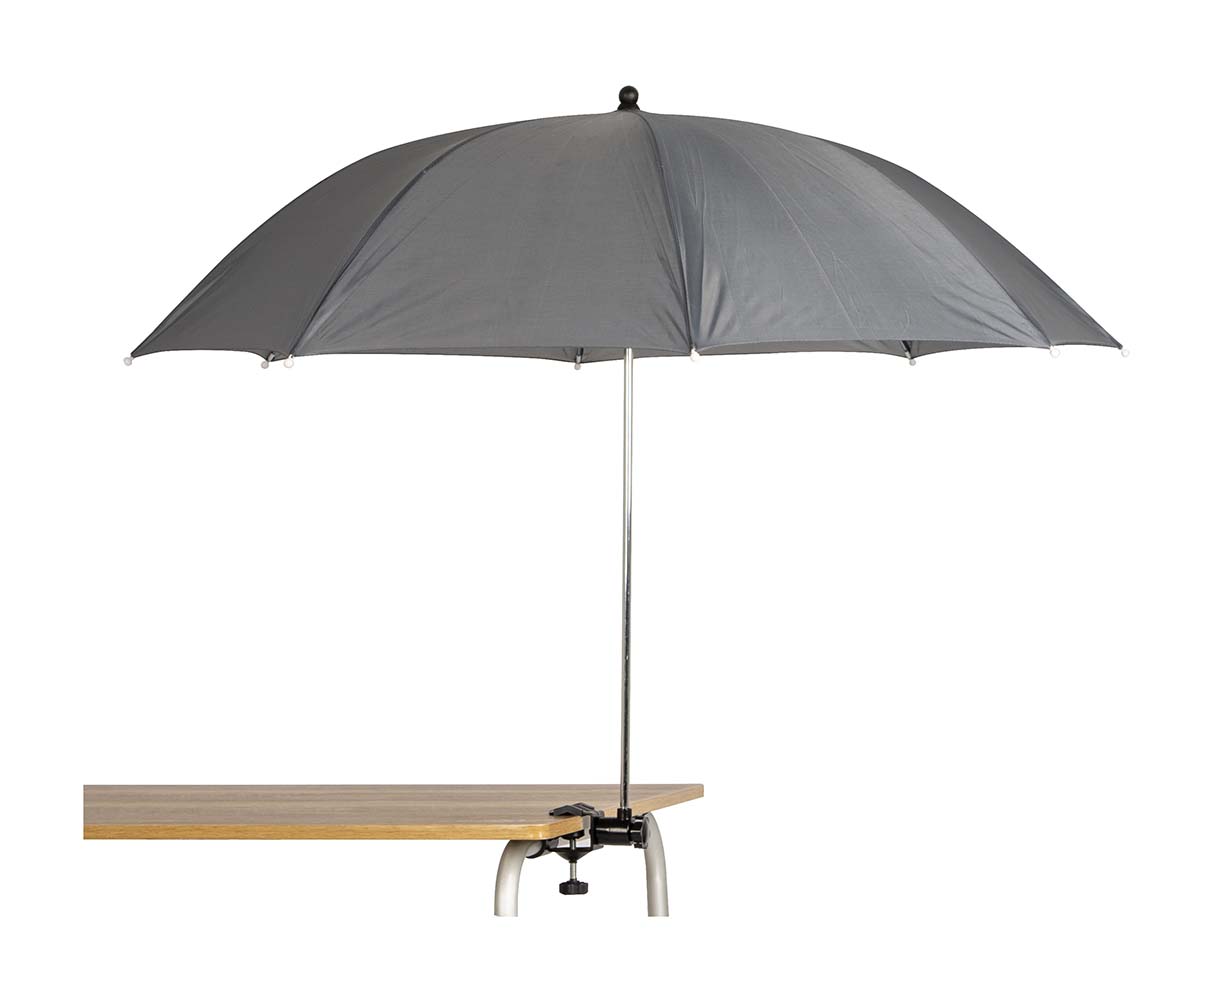 7267288 An easy to attach table parasol. This sturdy parasol has a galvanized steel frame and a polyester fabric. Suitable for tables up to 3.2 cm thick. The fabric also has a silver coating for extra UV protection. Very compact to carry.